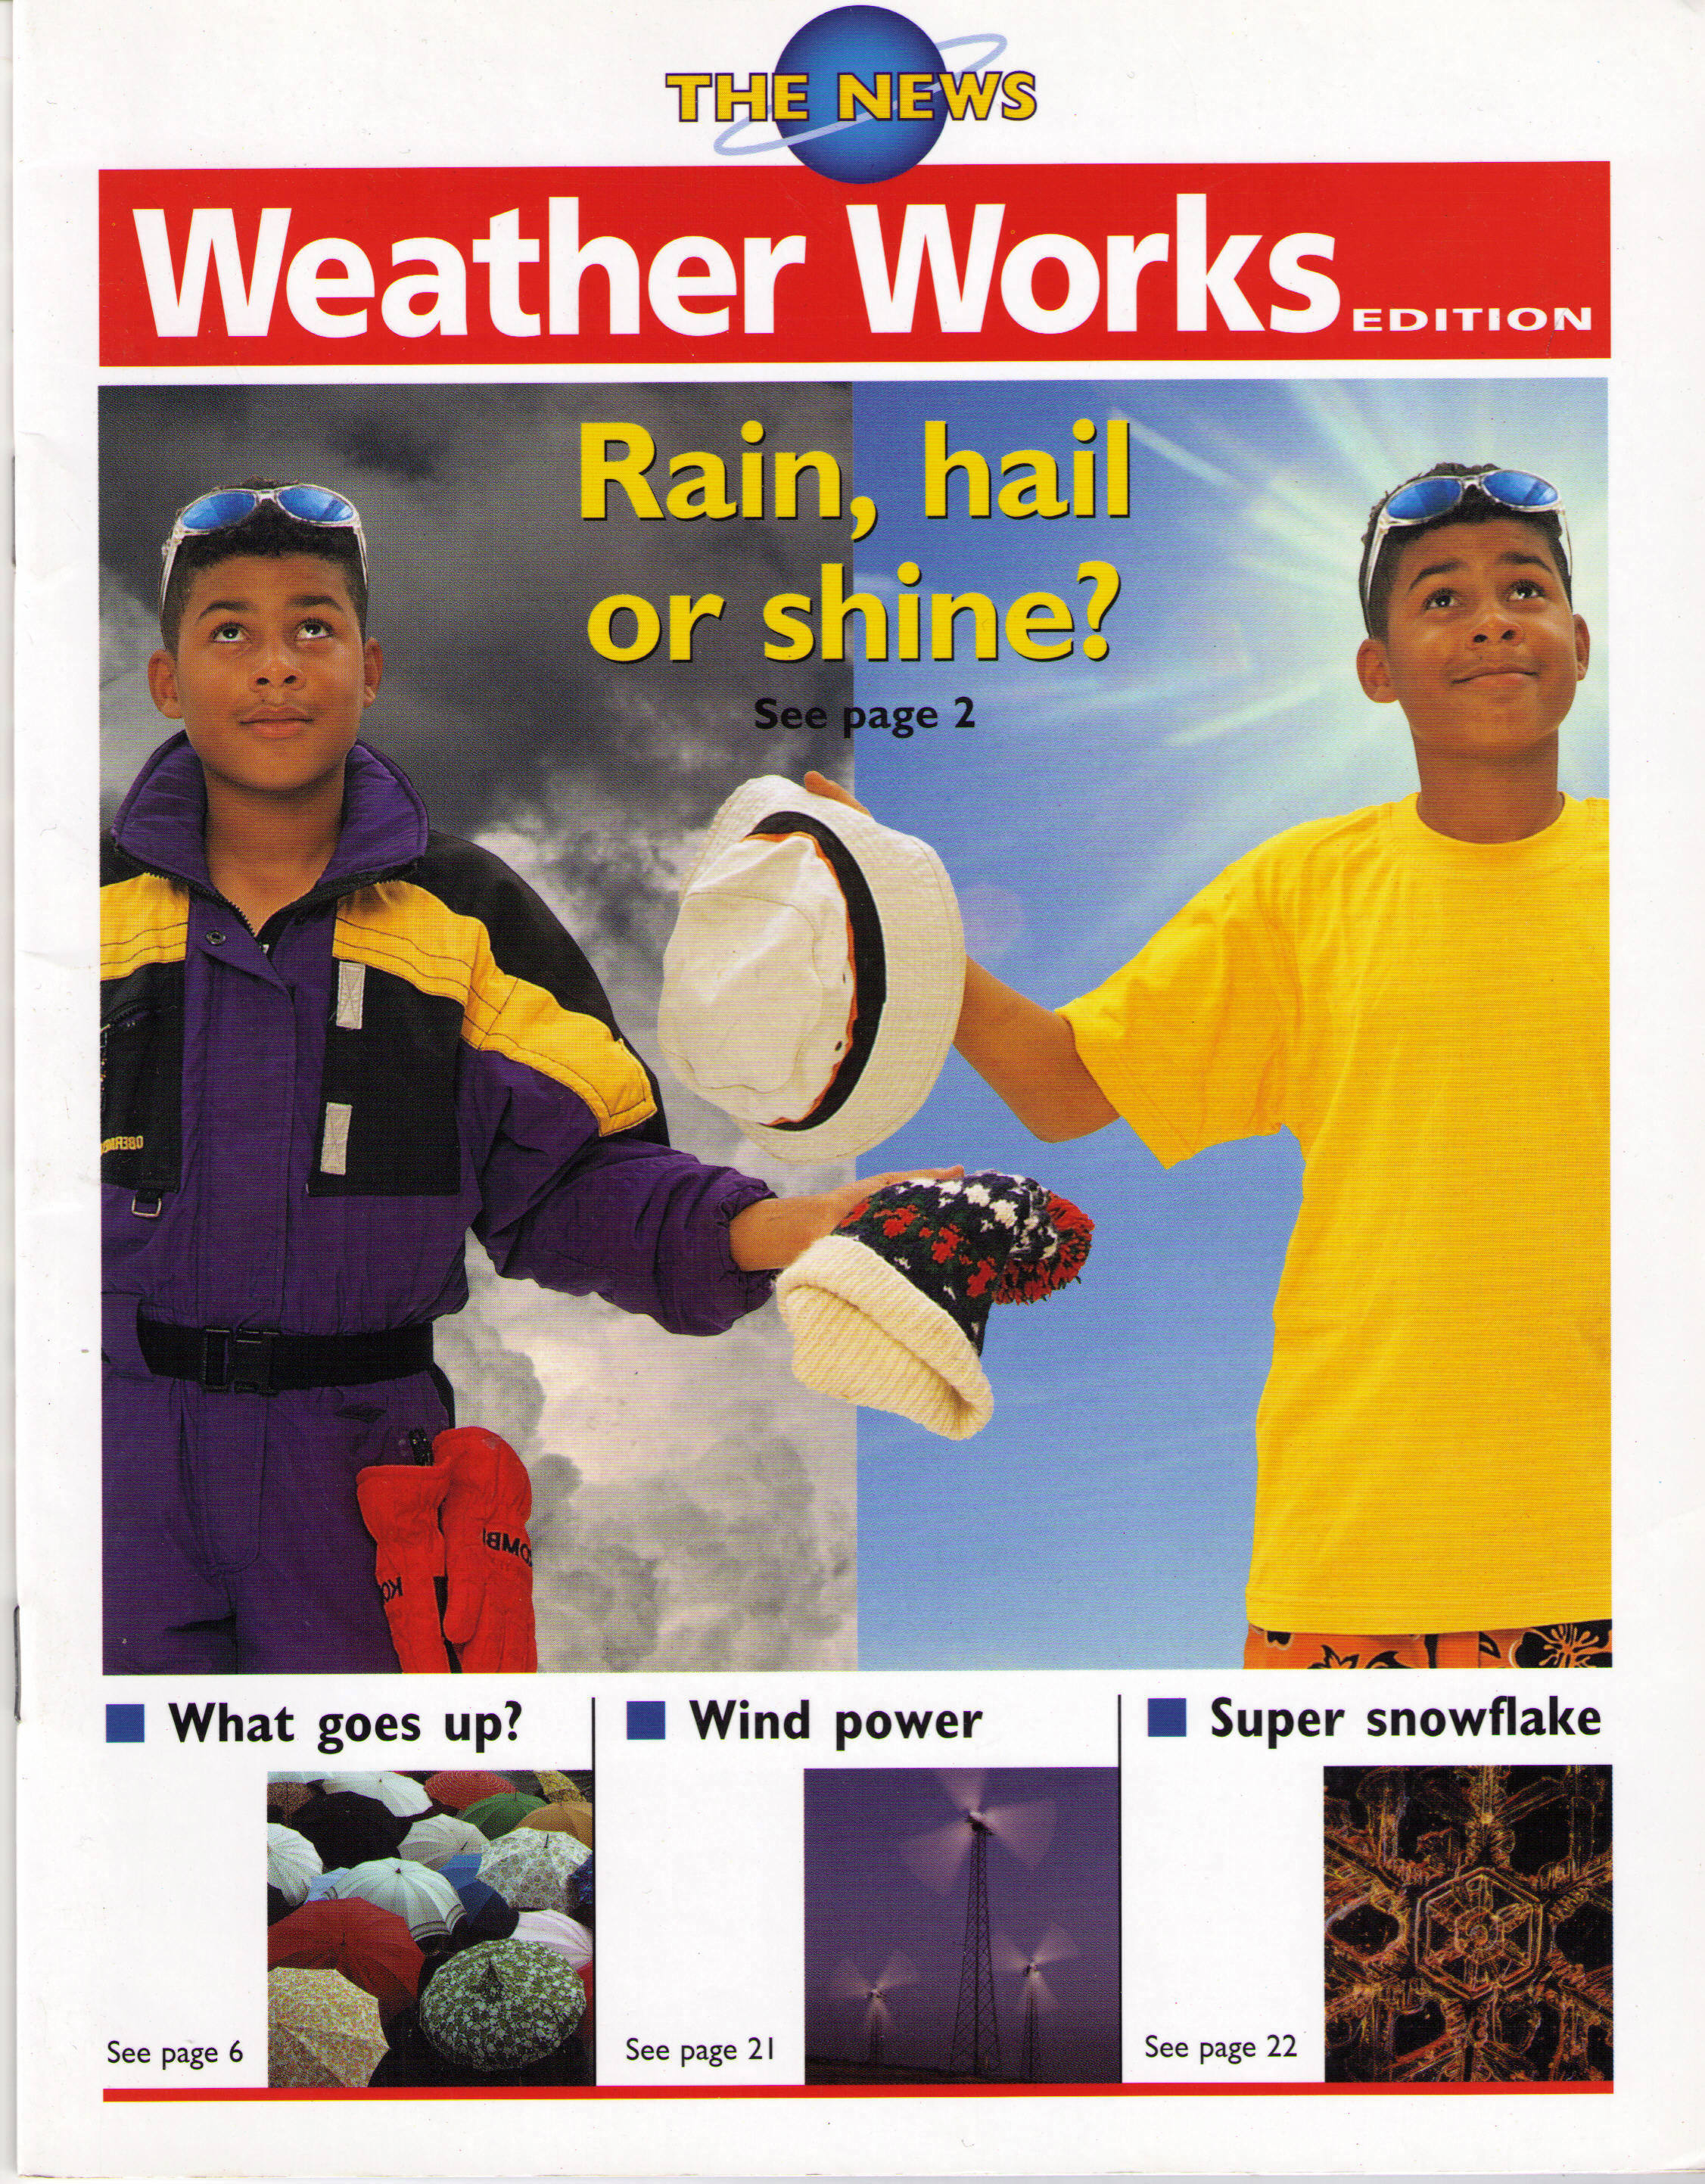 Warning - Weather on the Way. Part of The News series by Horwitz Martin Education.